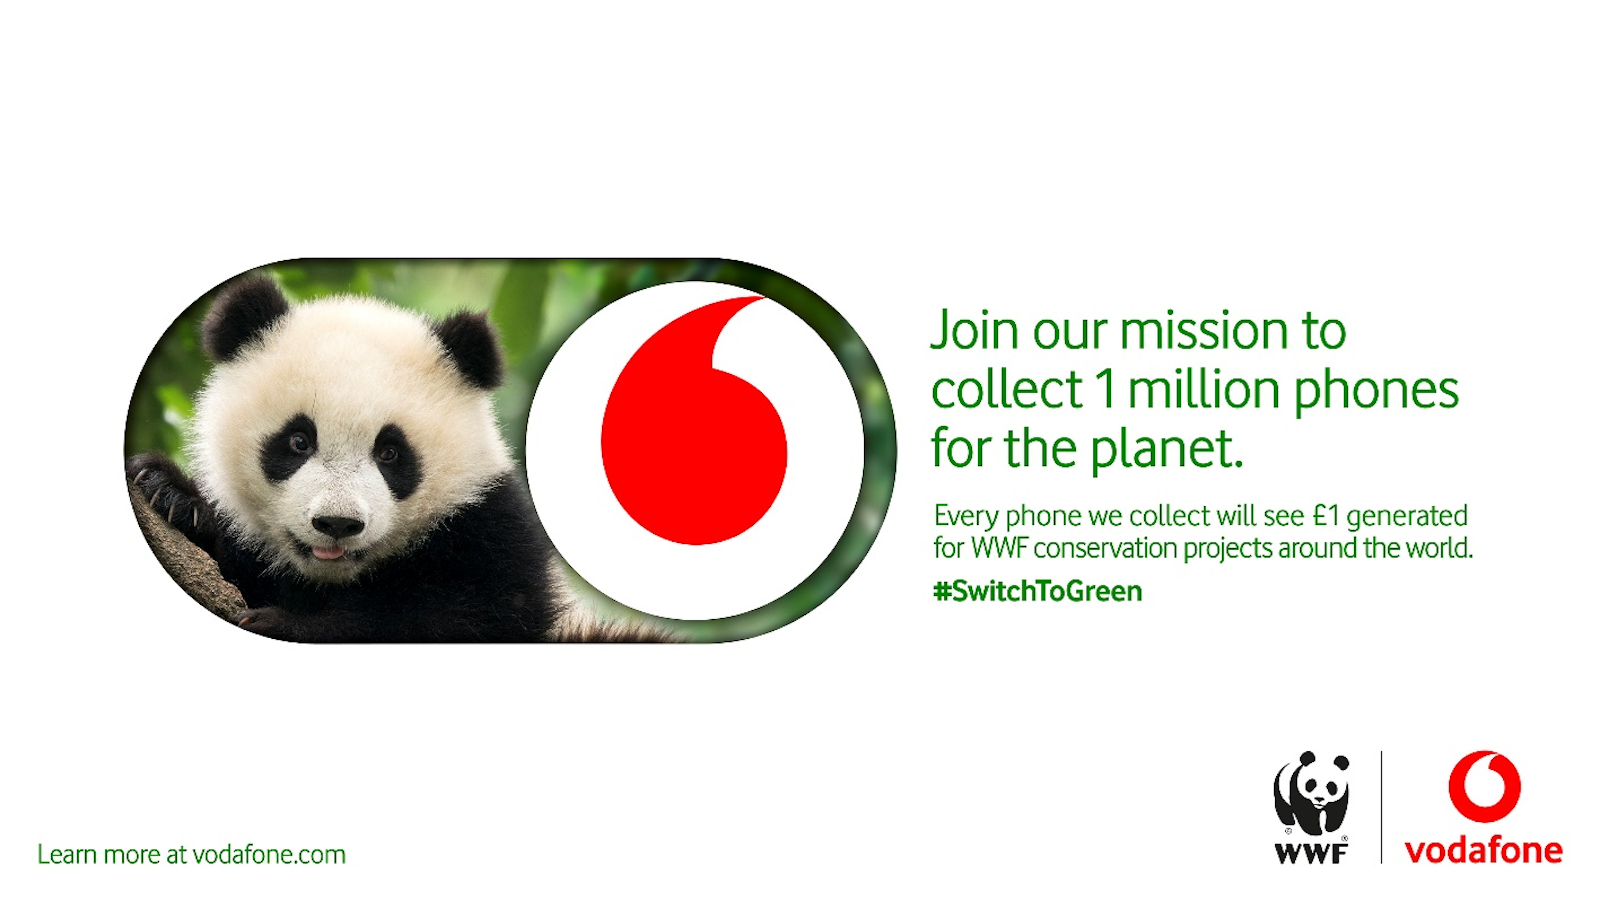 WWF and Vodafone